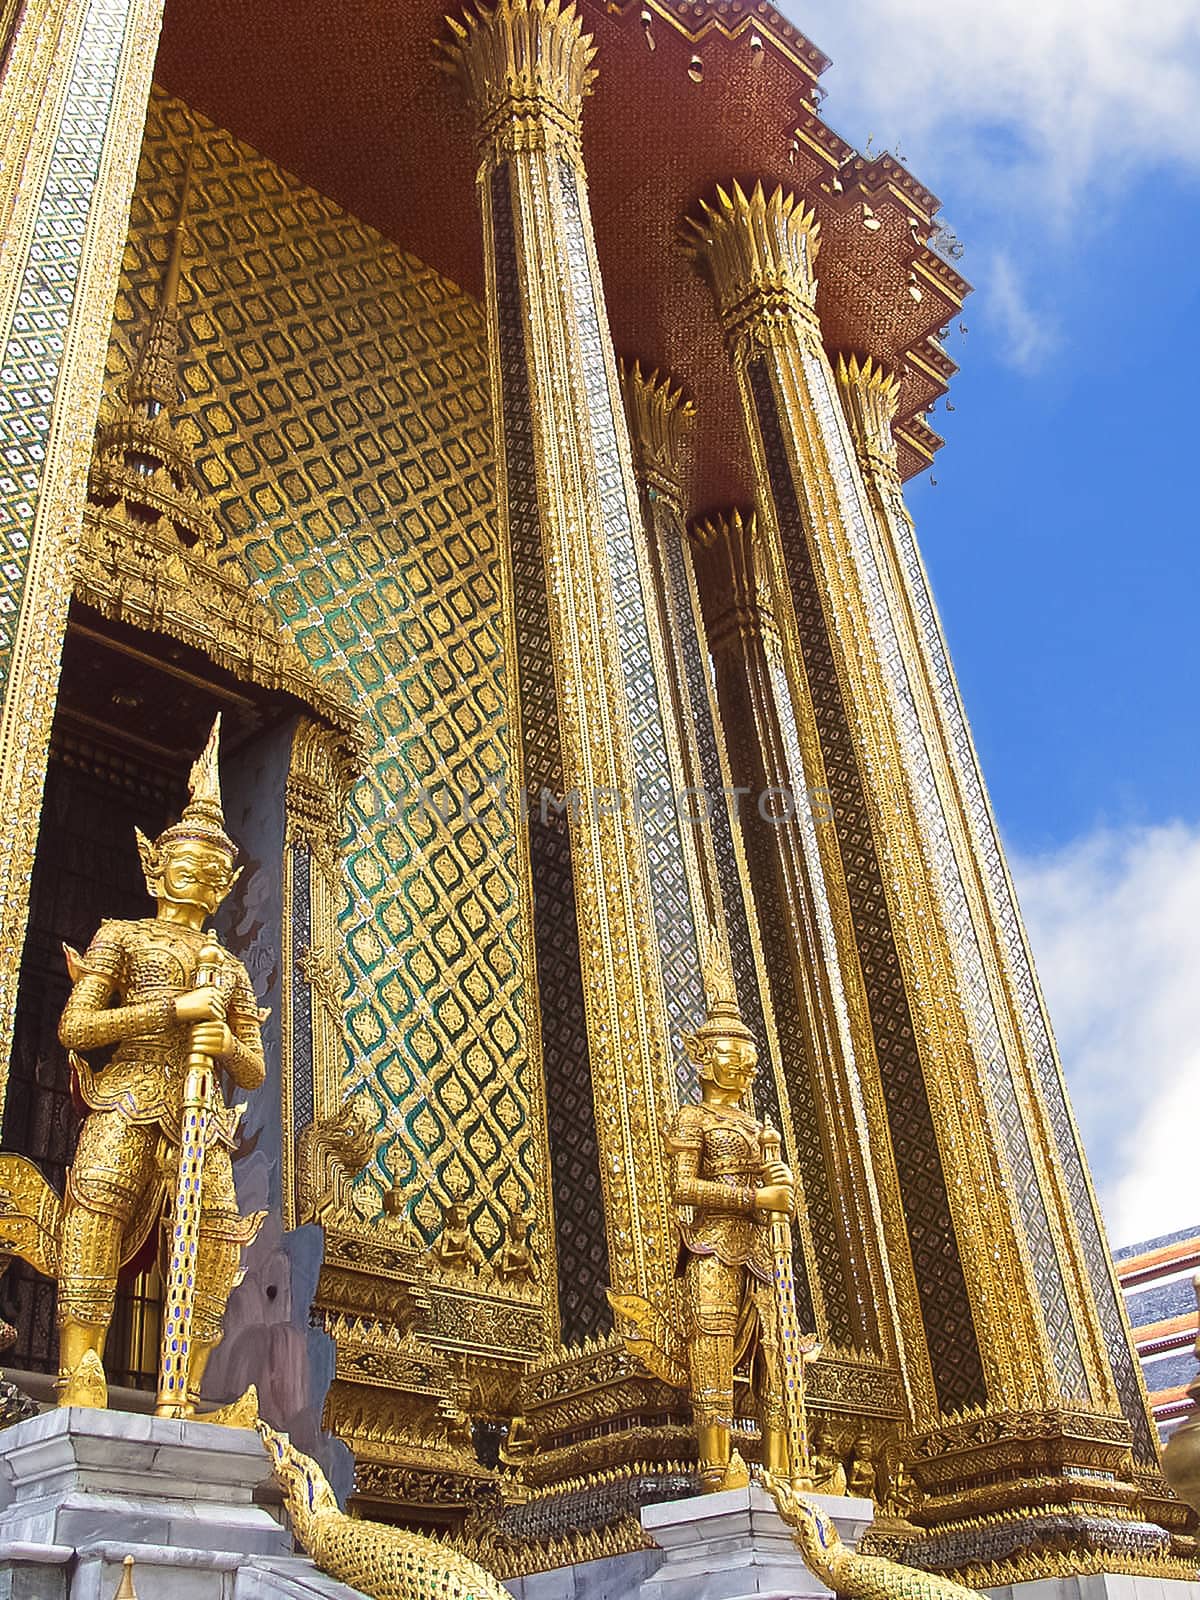 Guards of the temple Wat Phra Kaew in the Grand Palace in bangko by NickNick